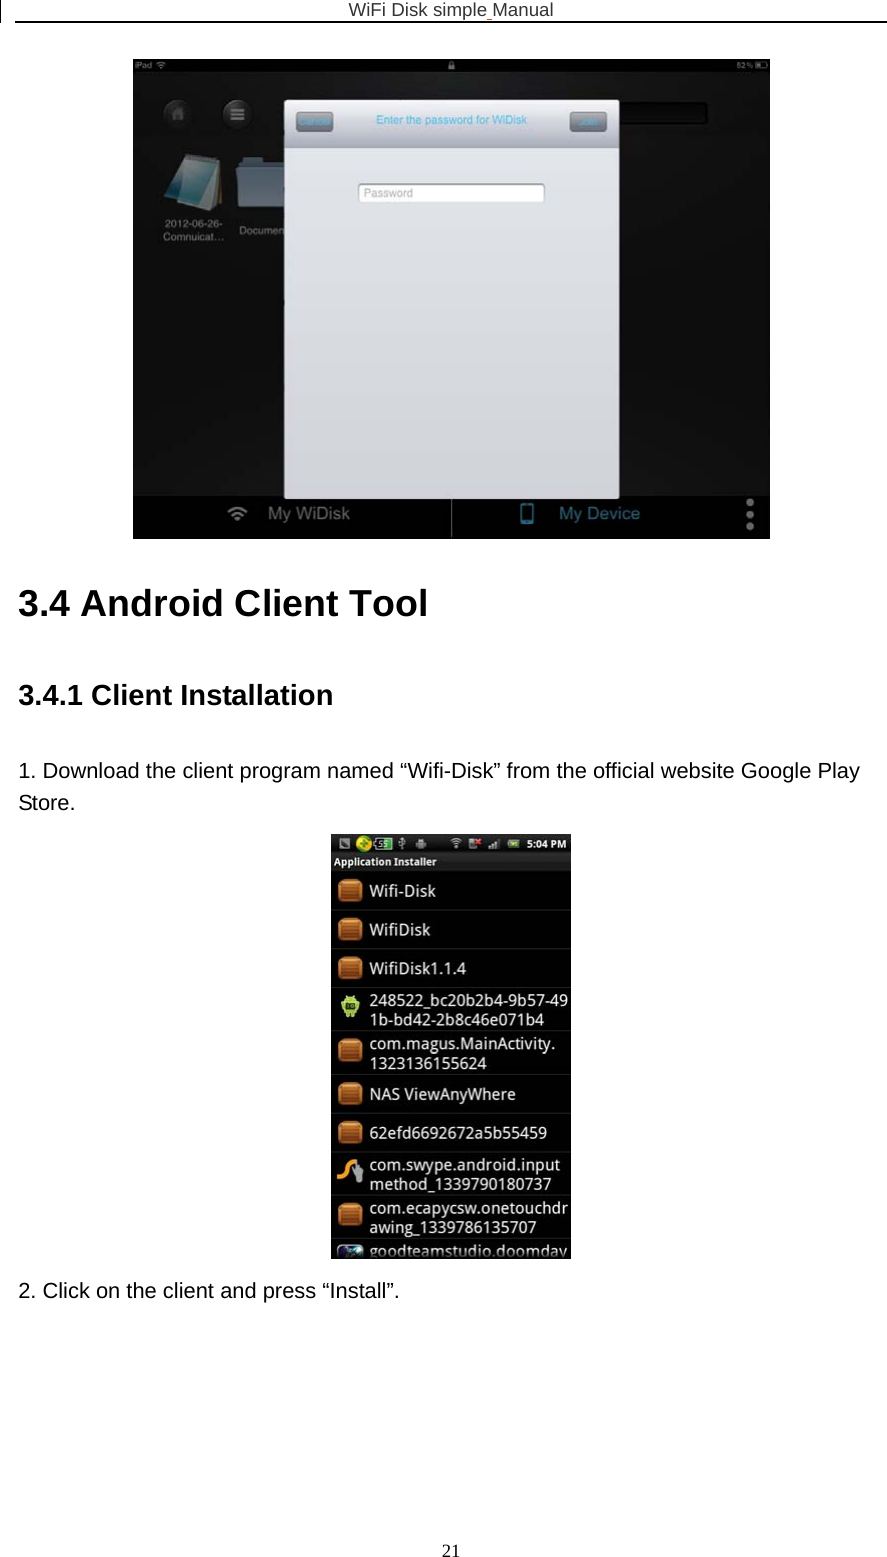 WiFi Disk simple Manual  21 3.4 Android Client Tool 3.4.1 Client Installation   1. Download the client program named “Wifi-Disk” from the official website Google Play Store.  2. Click on the client and press “Install”. 